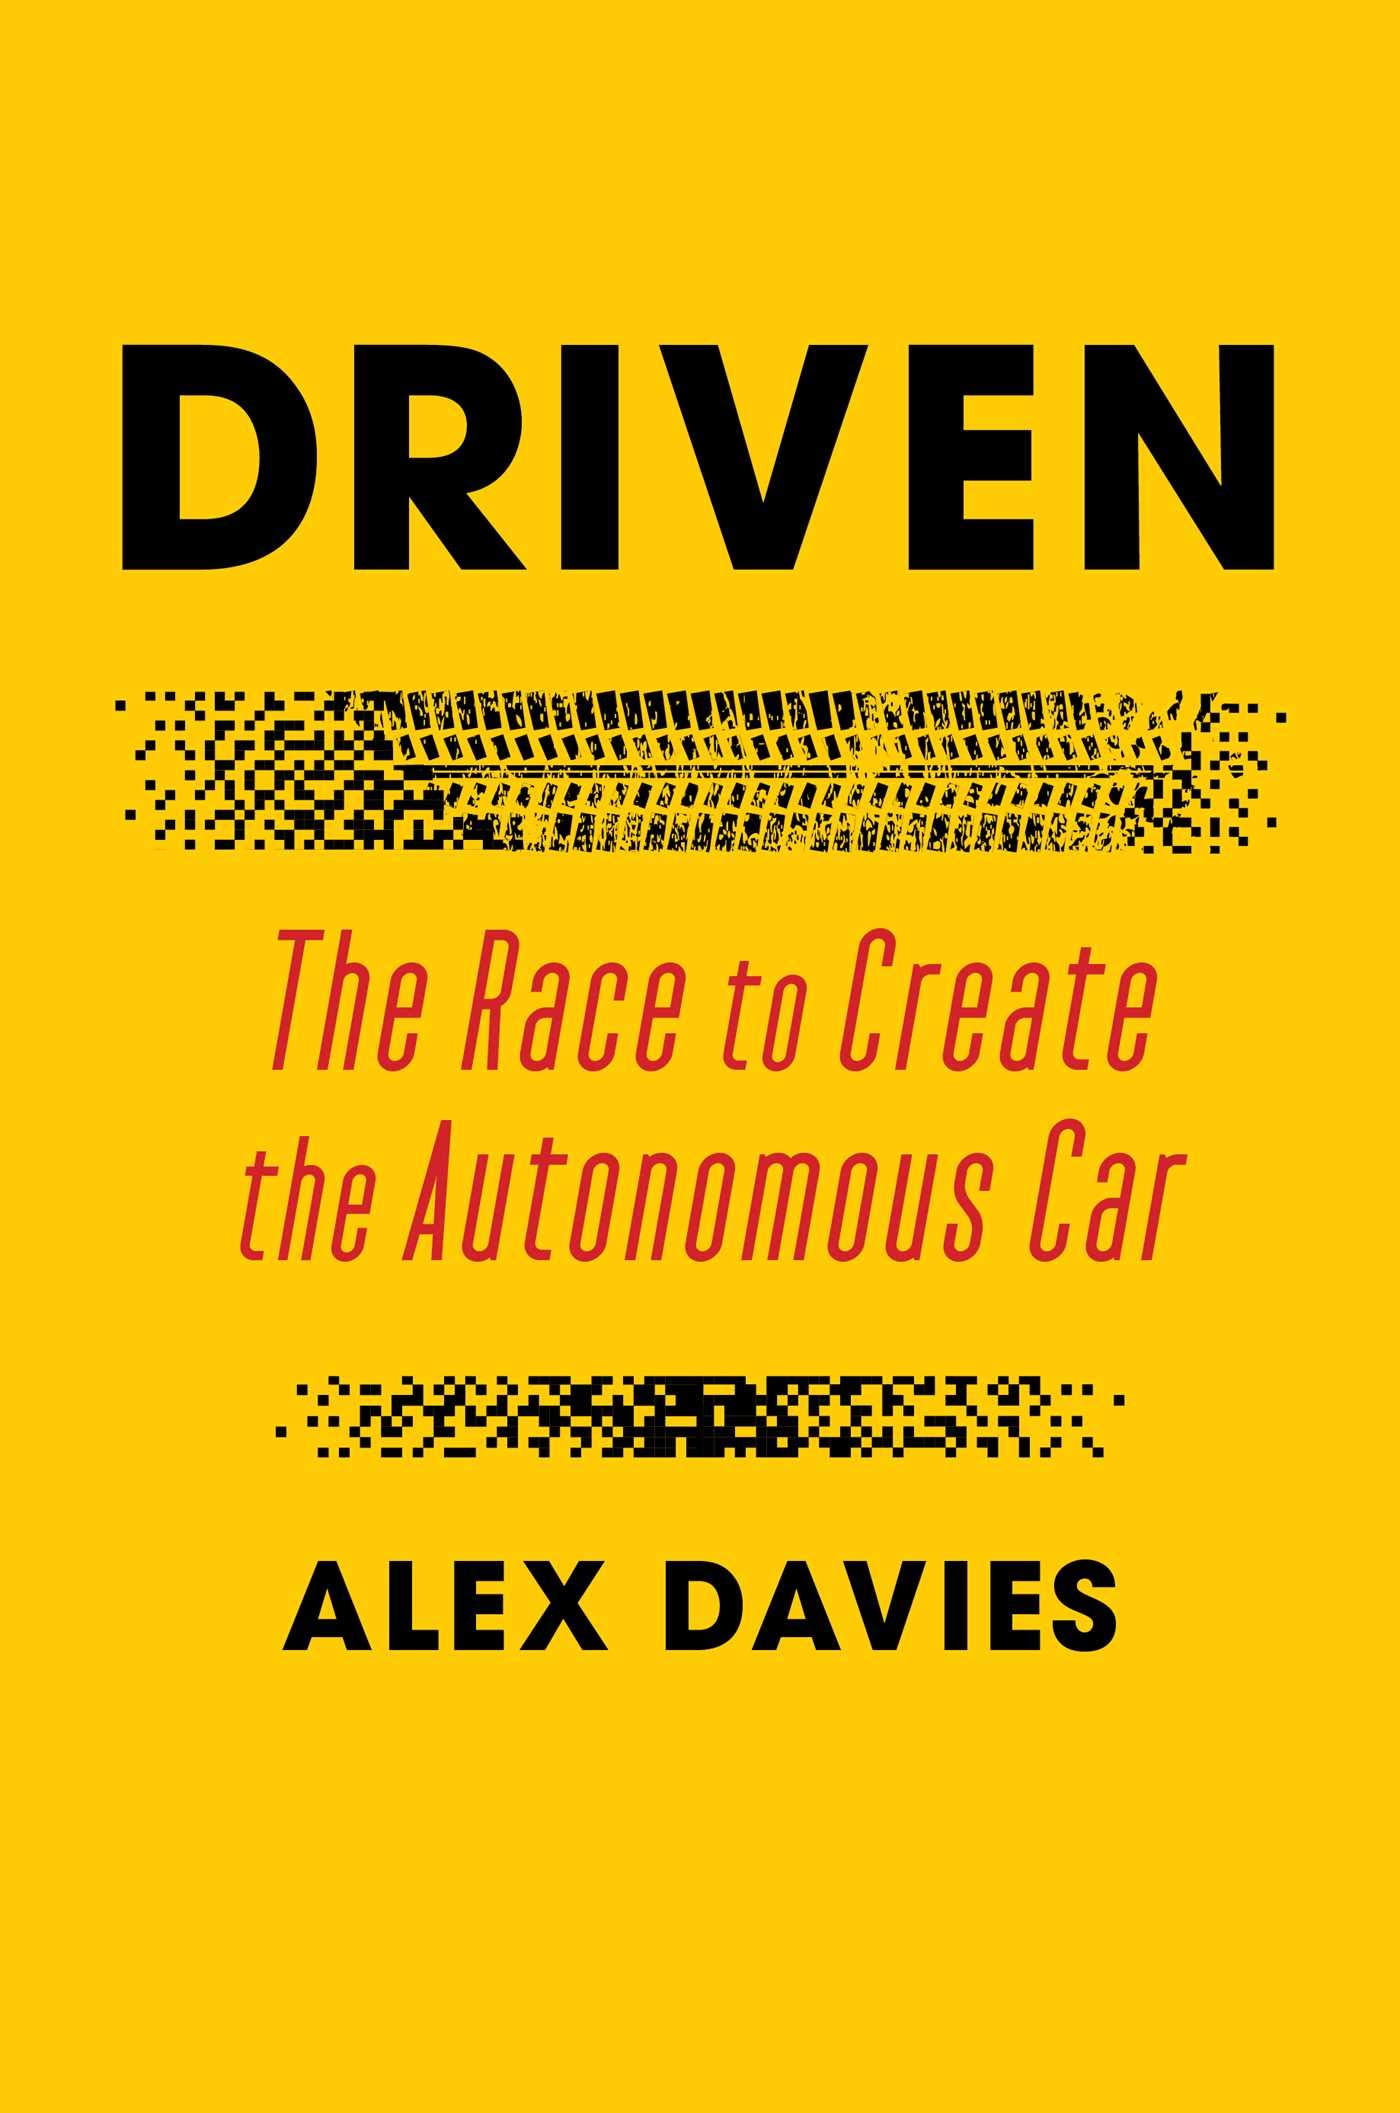 Image for "Driven"